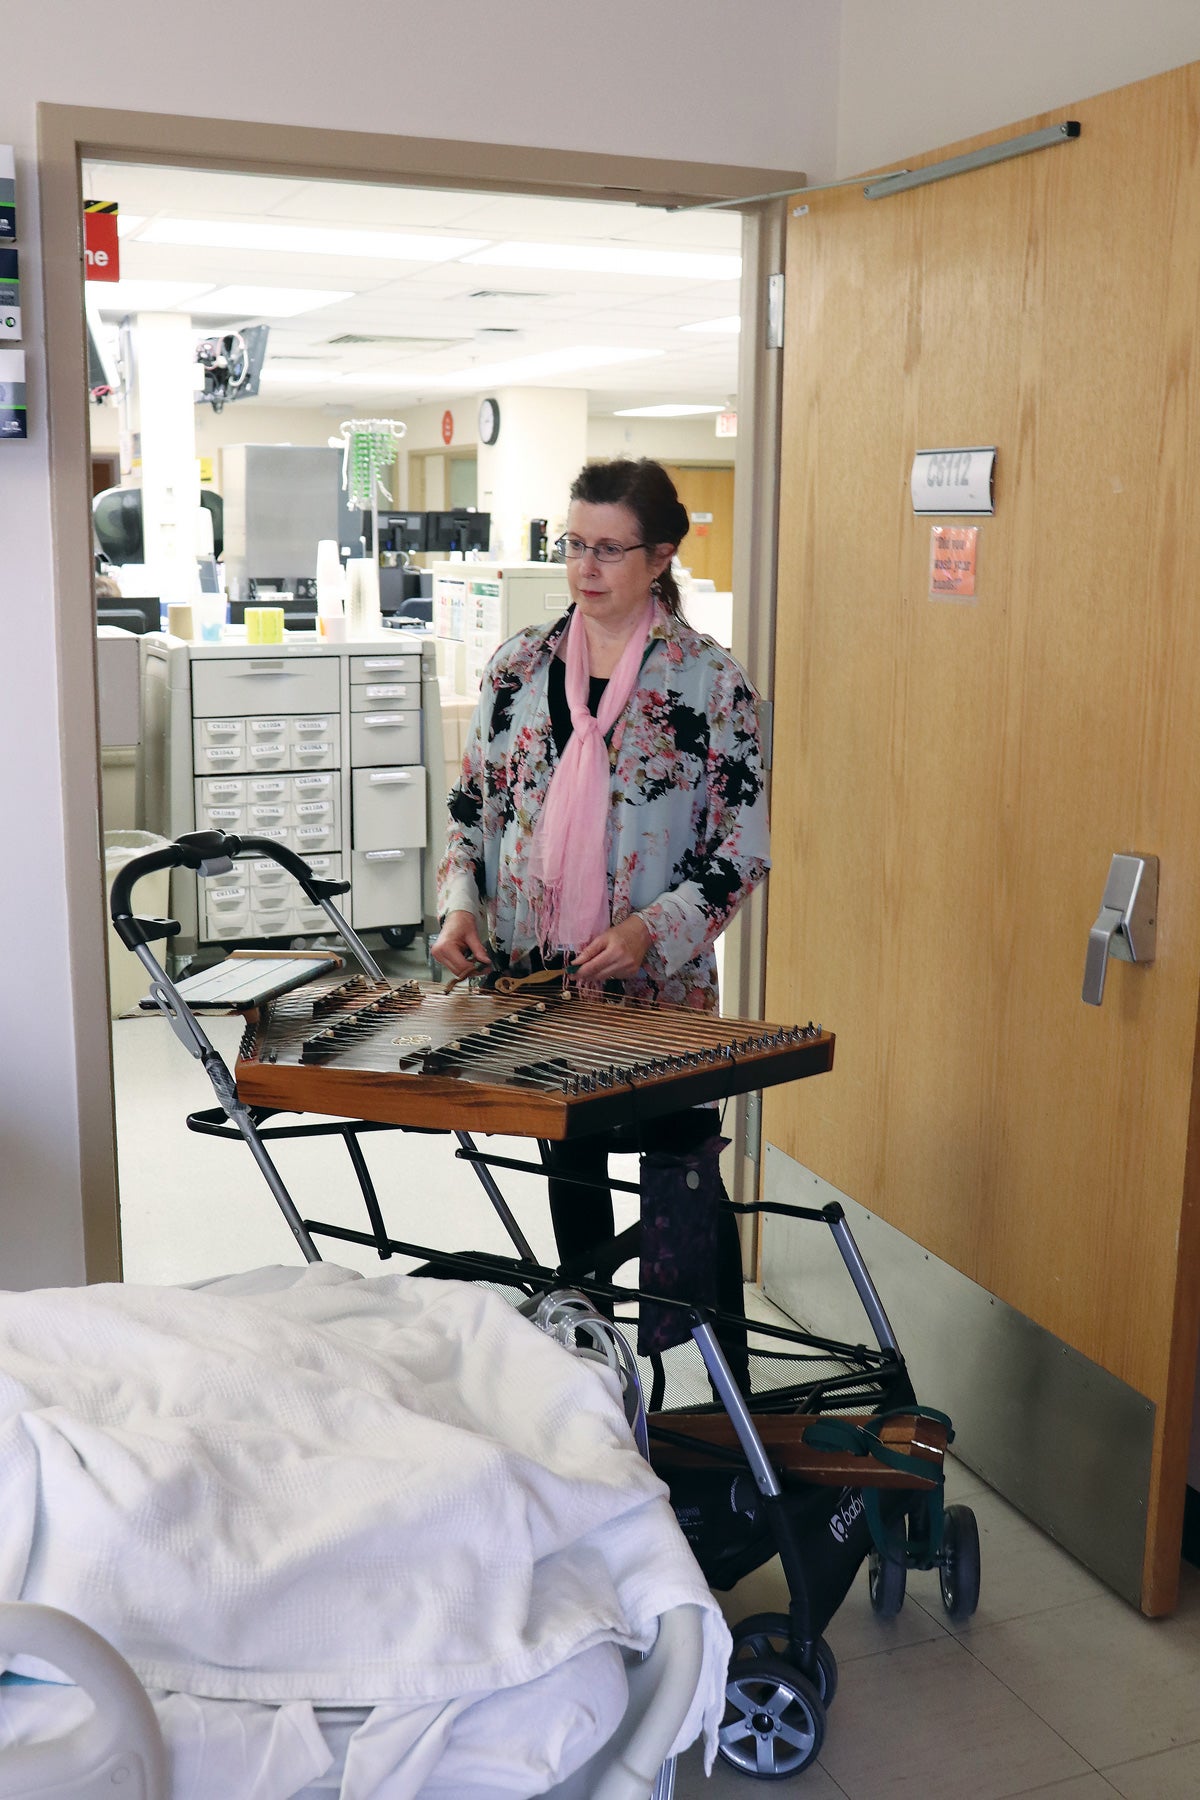 a woman with a pink scarf plays a musical instrument in a hospital room